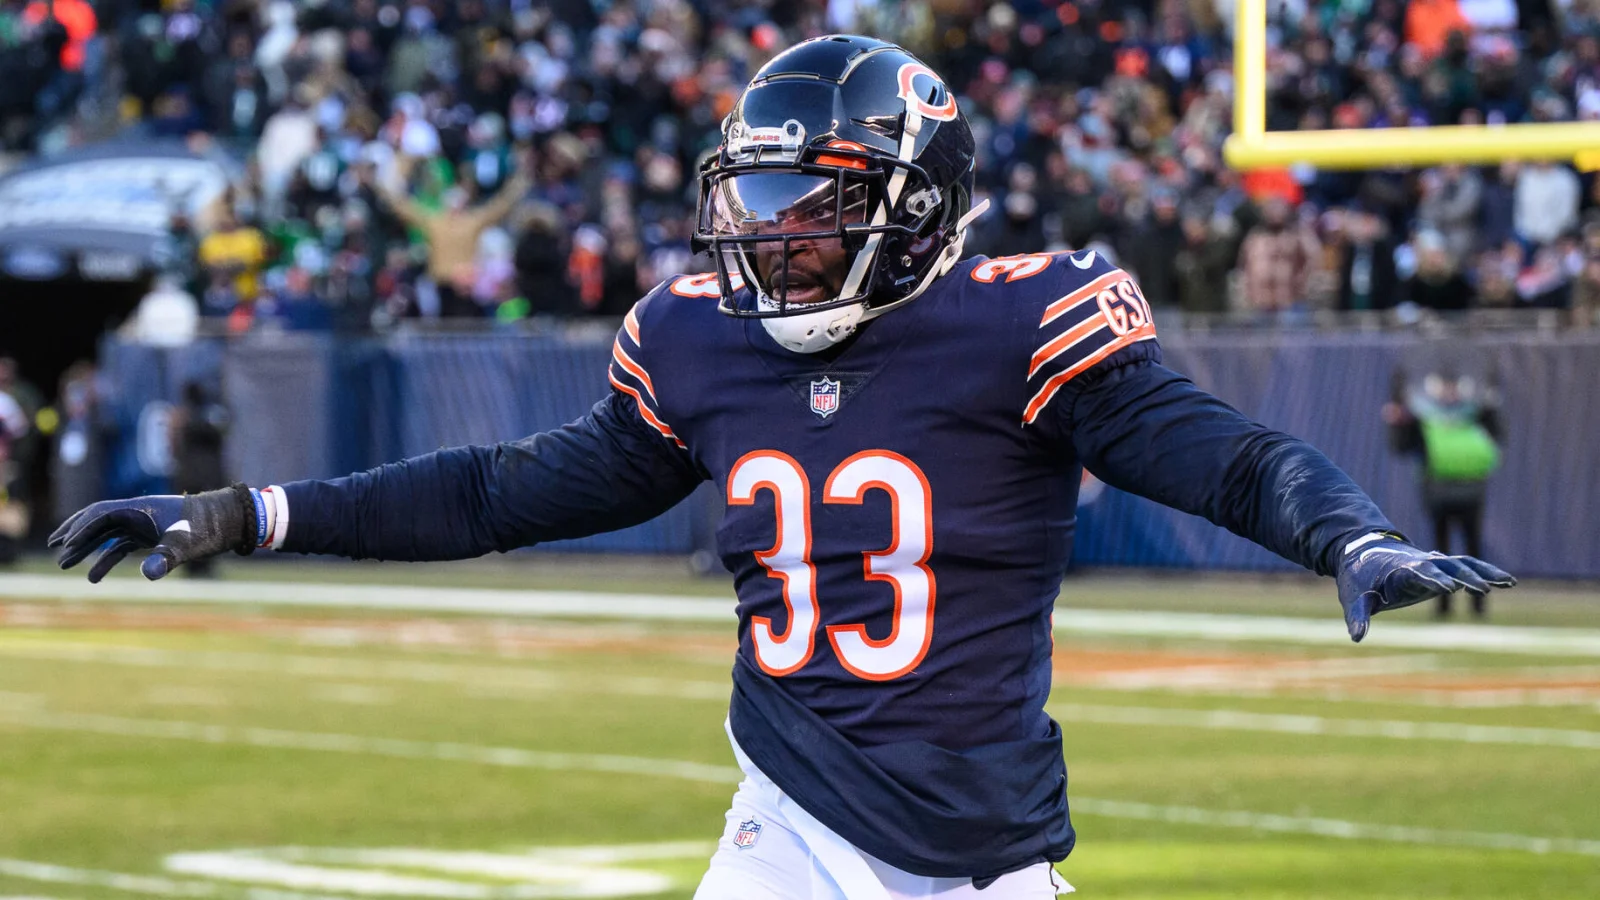 Jaylon-Johnsons-Trade-Request-Will-the-Chicago-Bears-Let-Go-of-Their-Star-Cornerback-infopulselive